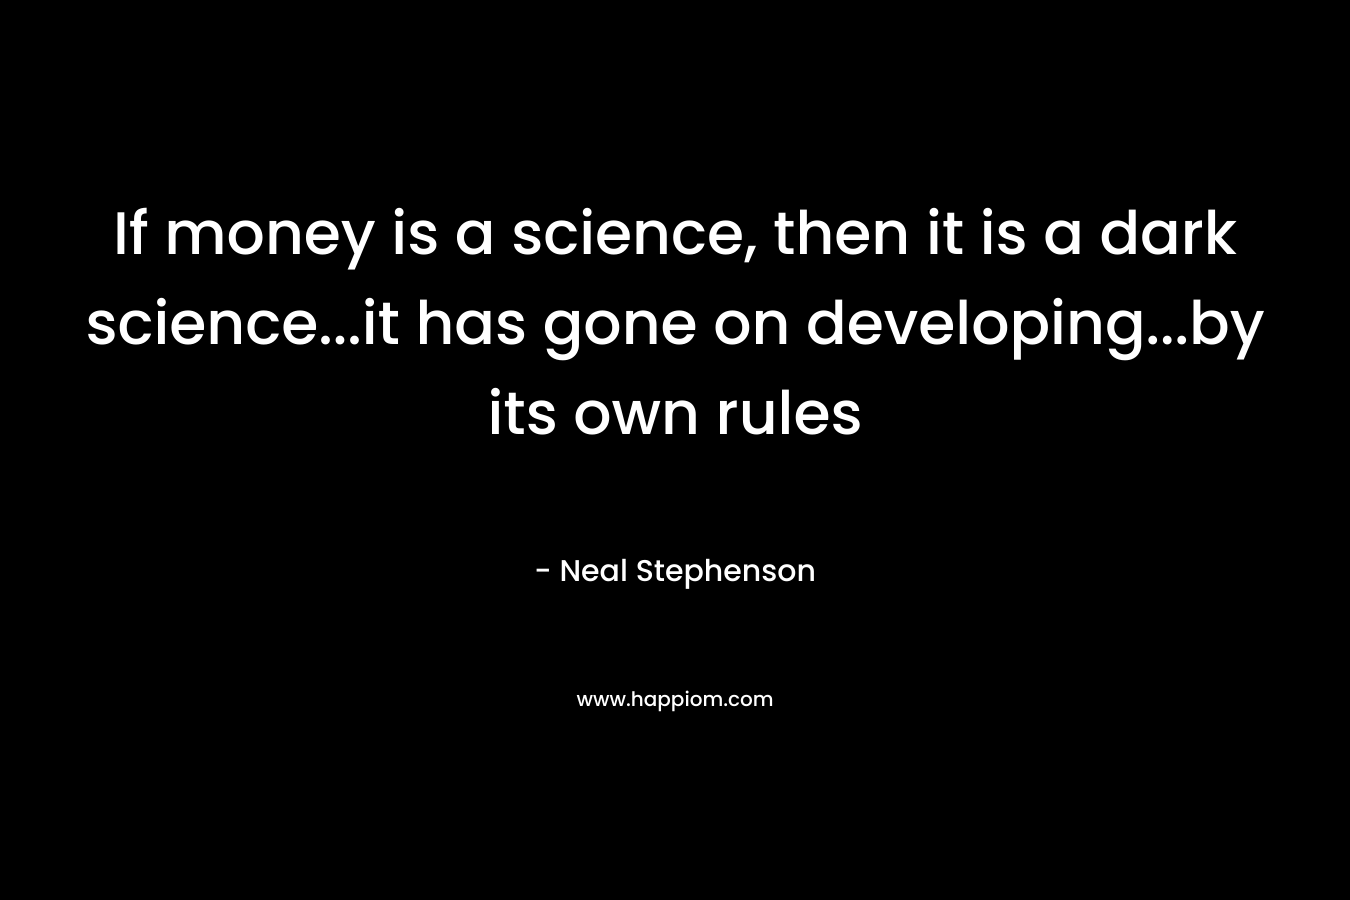 If money is a science, then it is a dark science...it has gone on developing...by its own rules